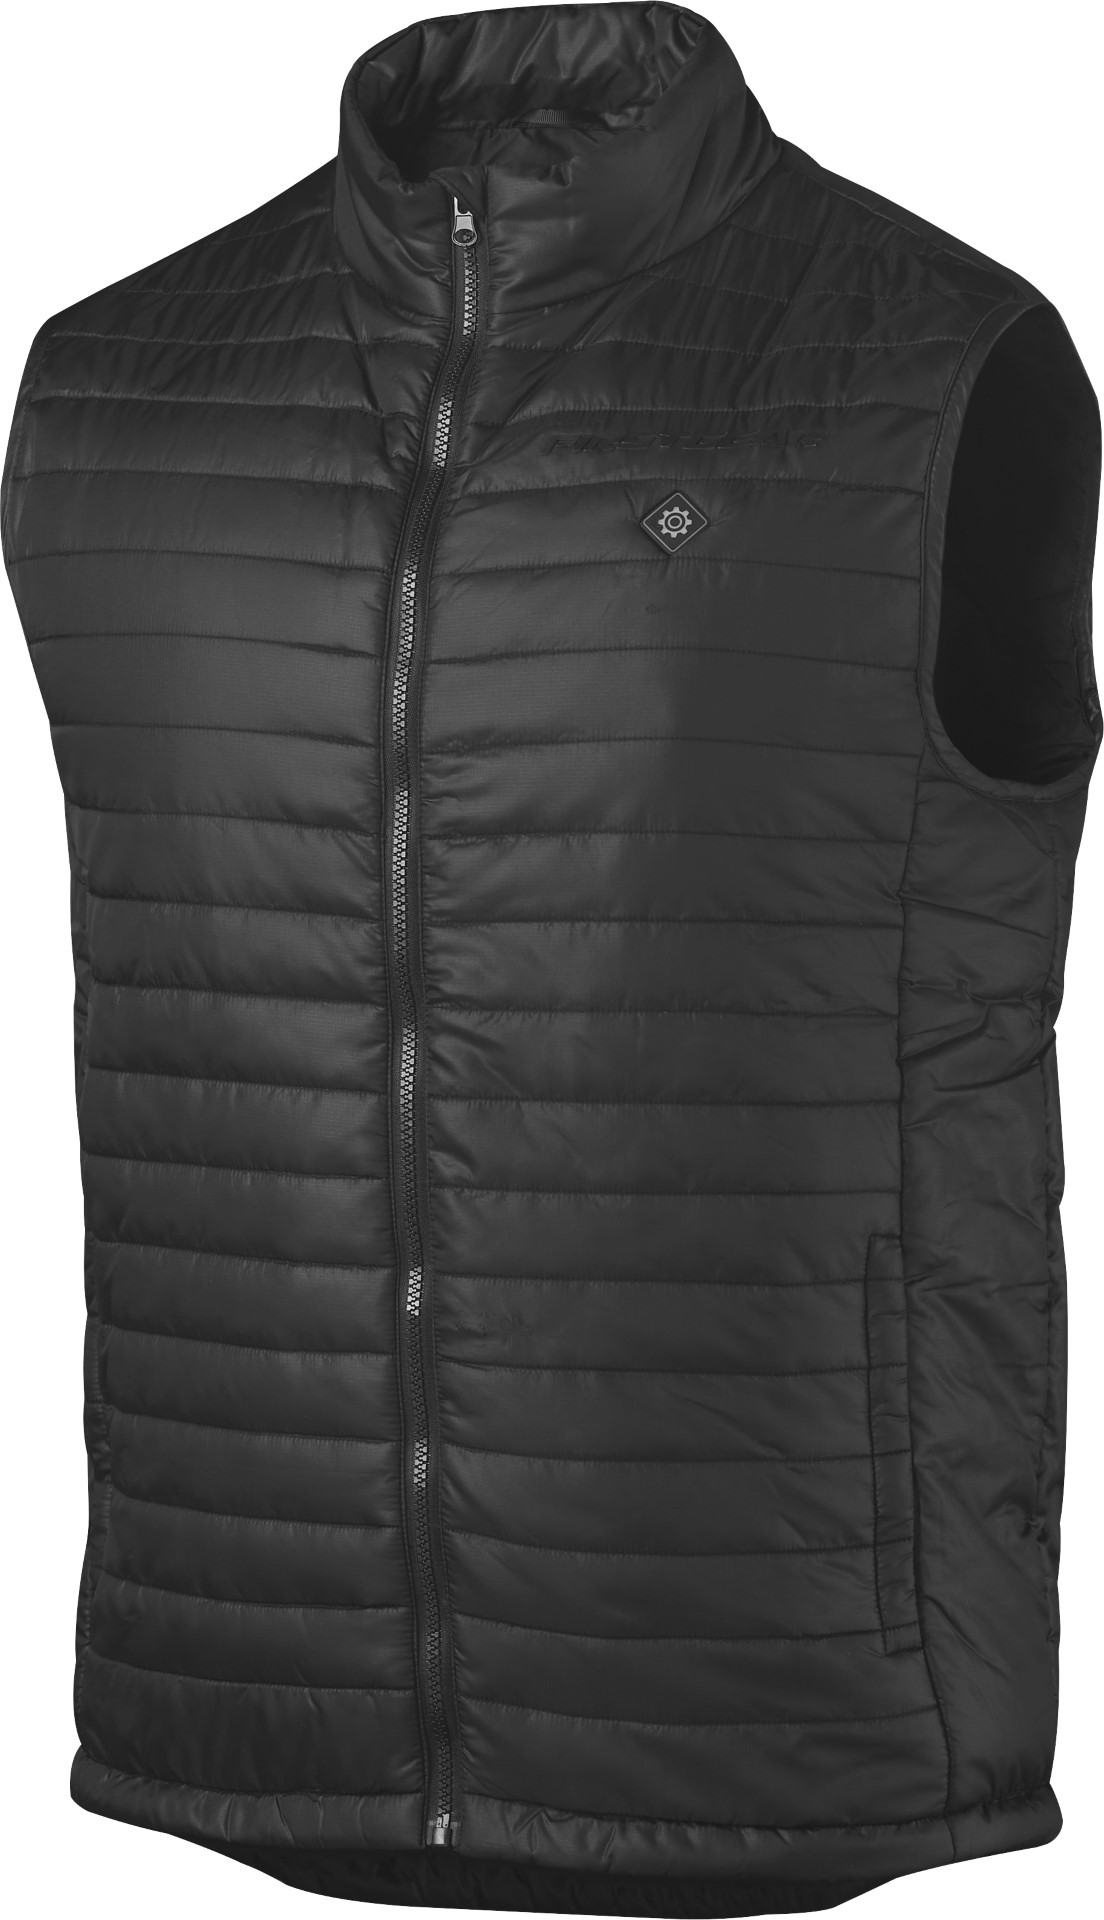 HEATED PUFFER VEST - WOMEN'S | Clothing | Premium Motorcycle Clothing